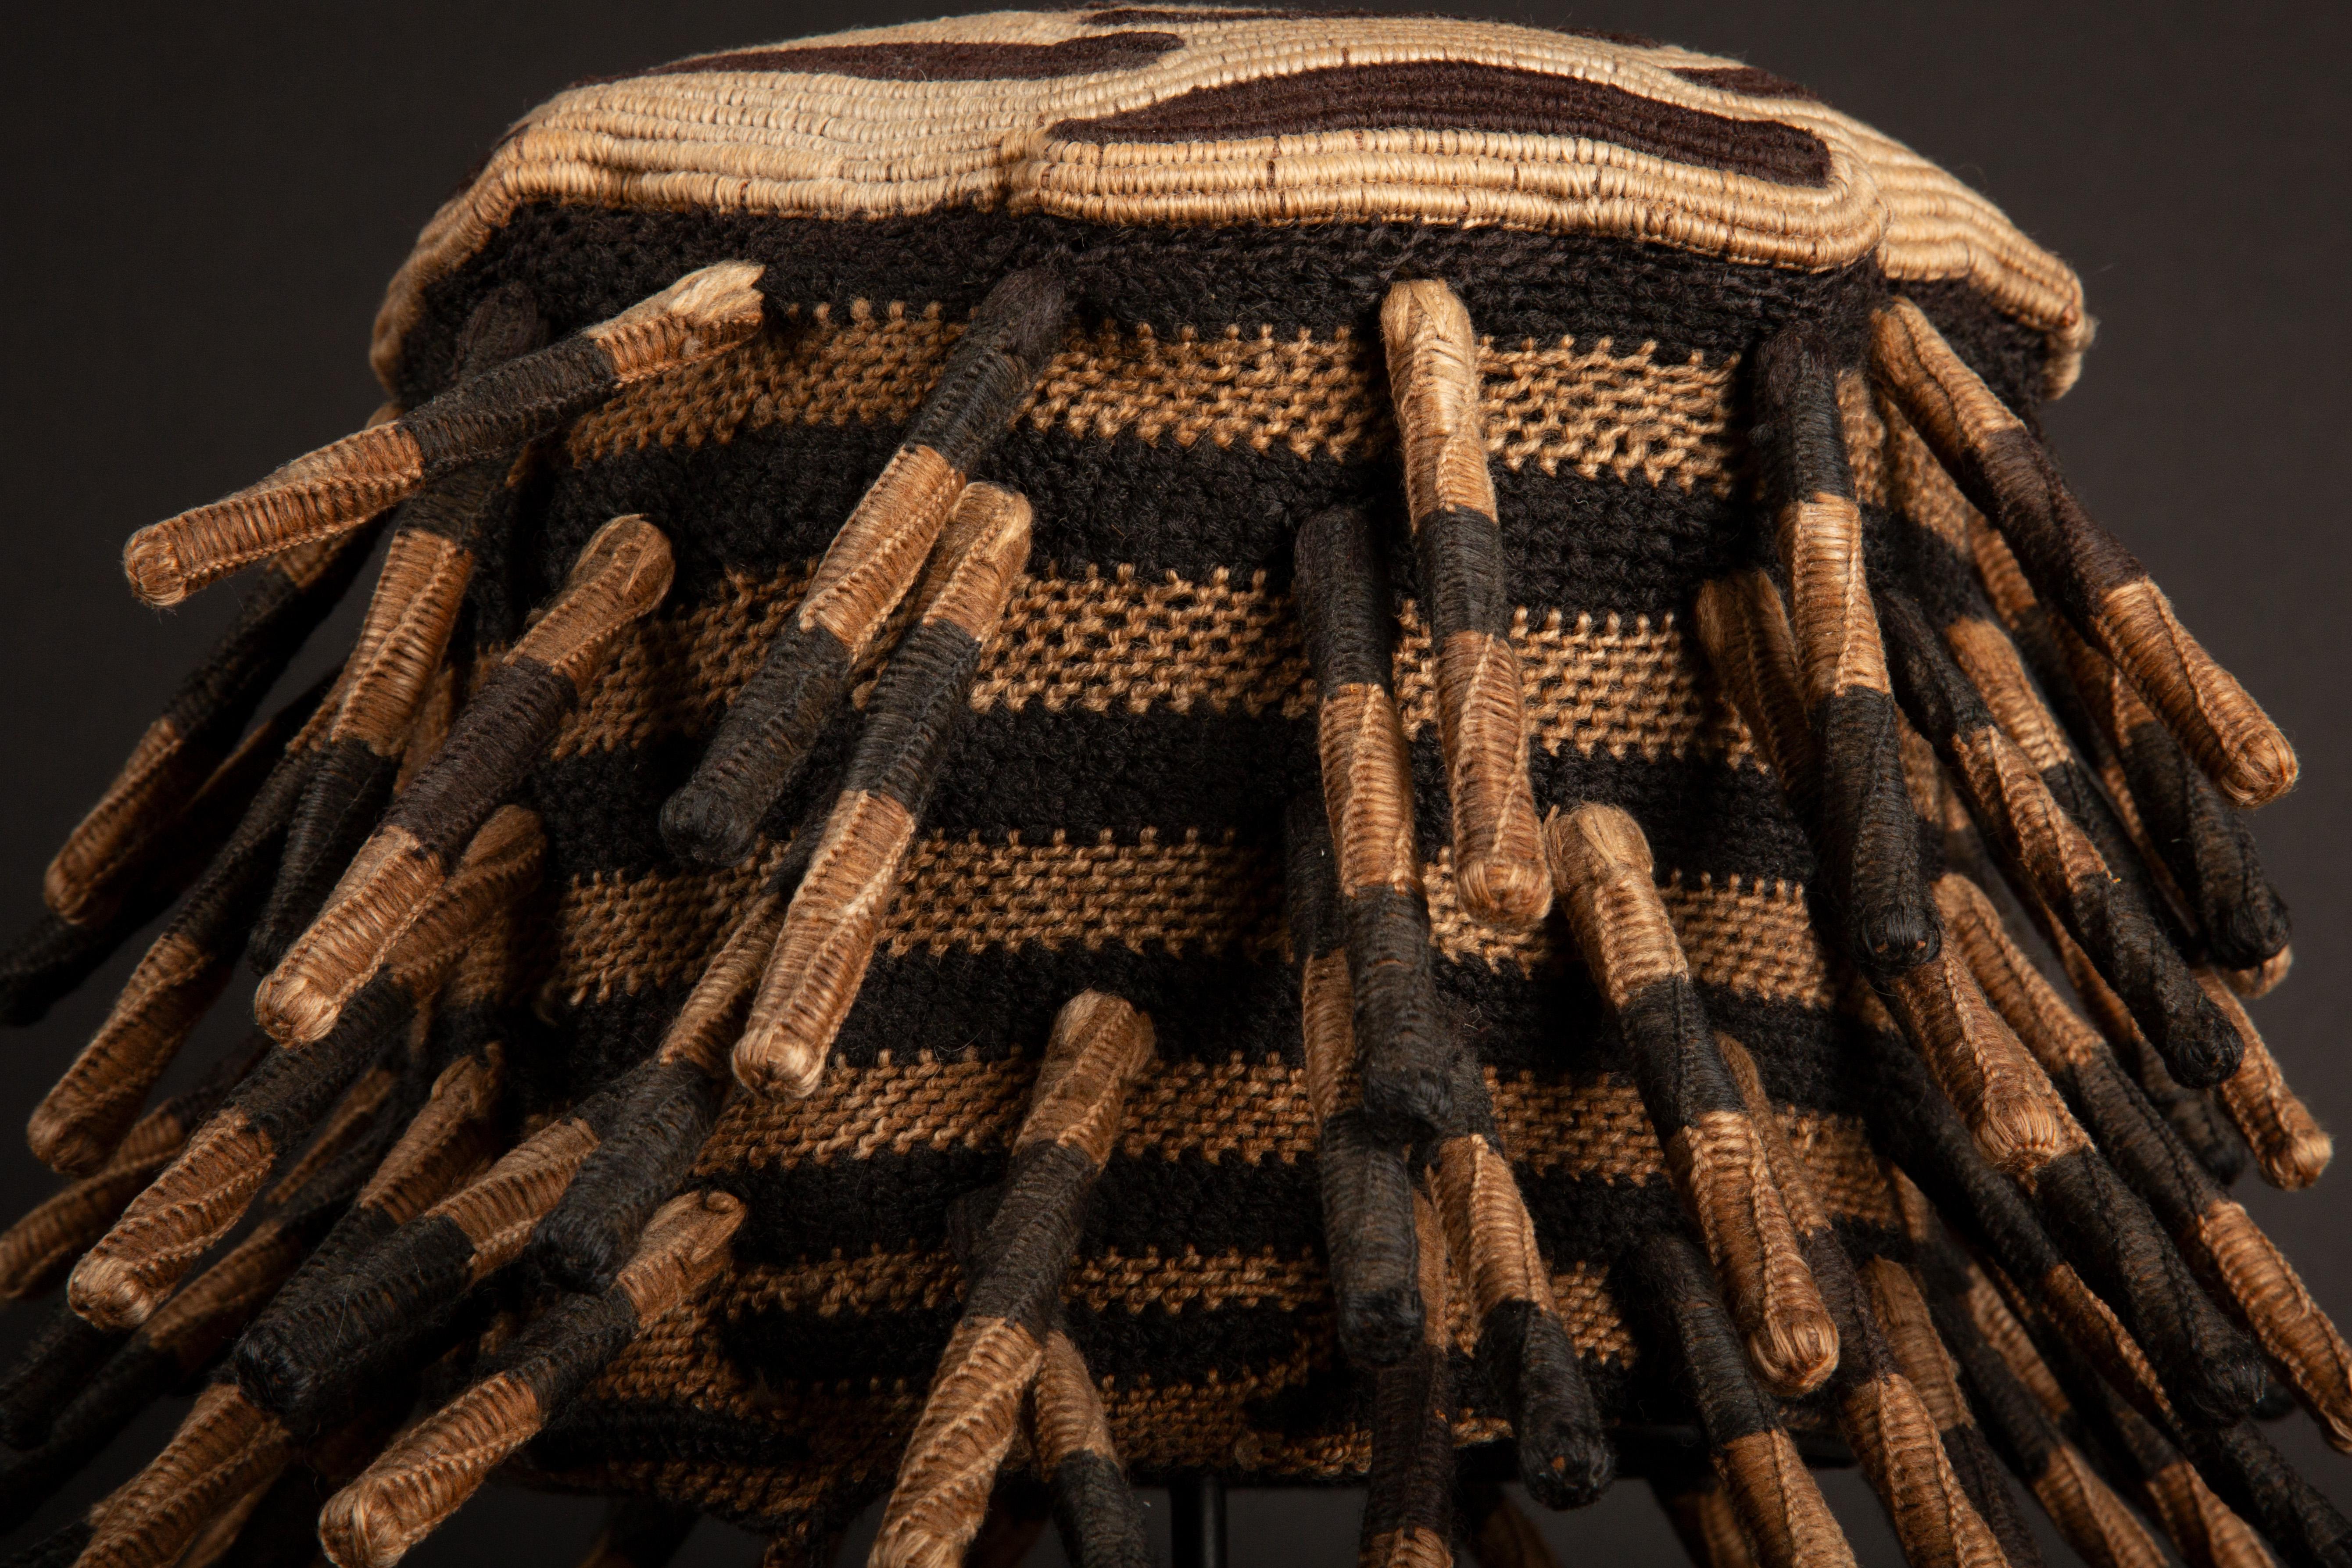 Cameroonian Prestige and Tradition: The Mounted Ashetu Hat of the Bamum and Bamileke People For Sale